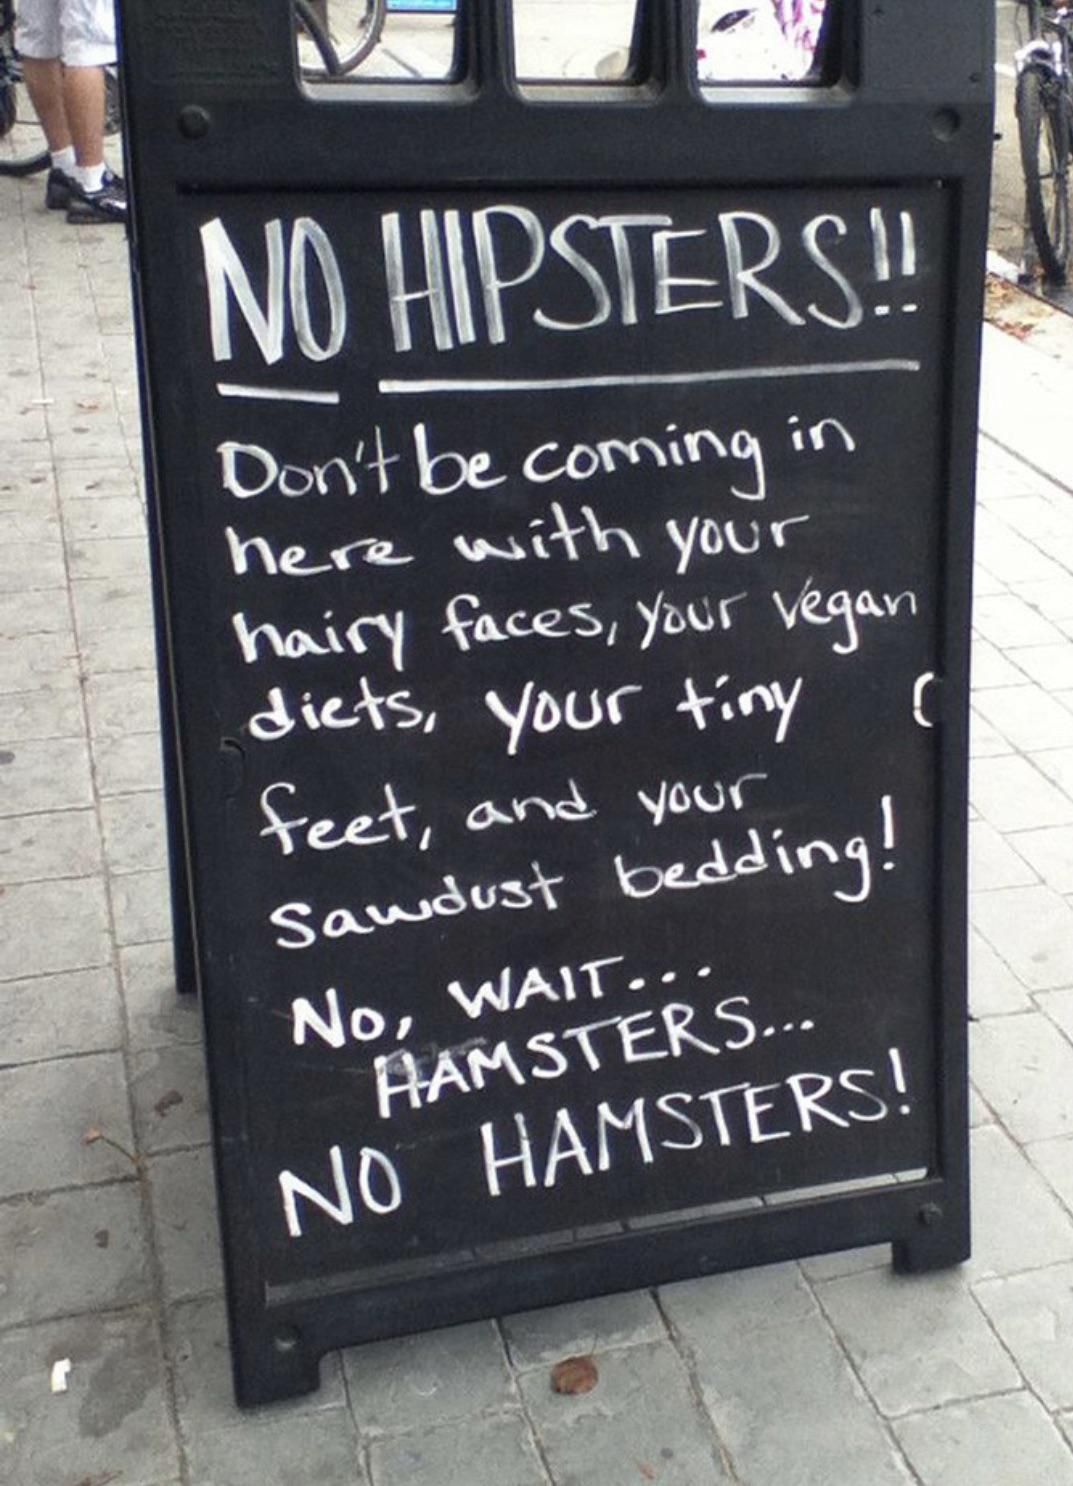 No Hipsters.